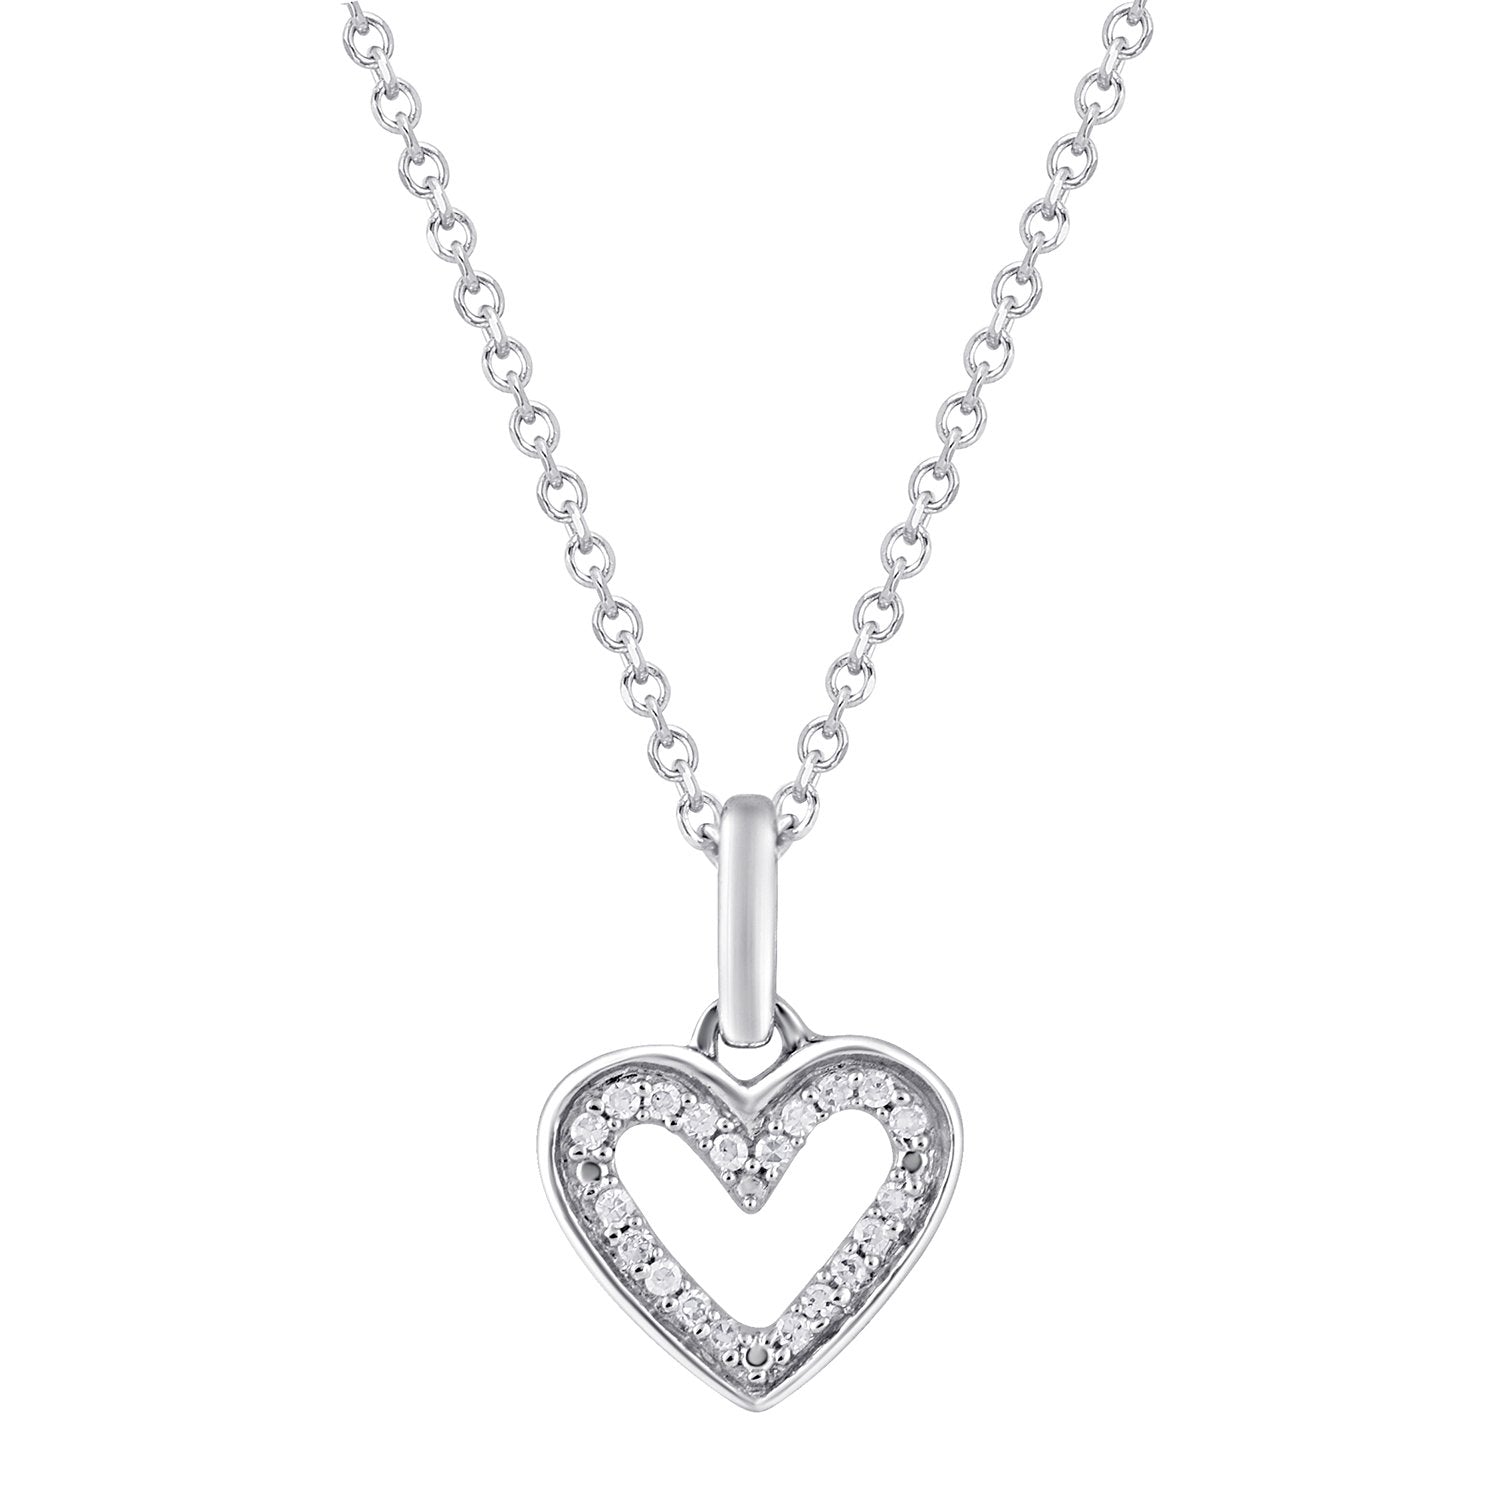 Mirage Diamond Set Open Heart Necklace in Sterling Silver Necklaces Bevilles 